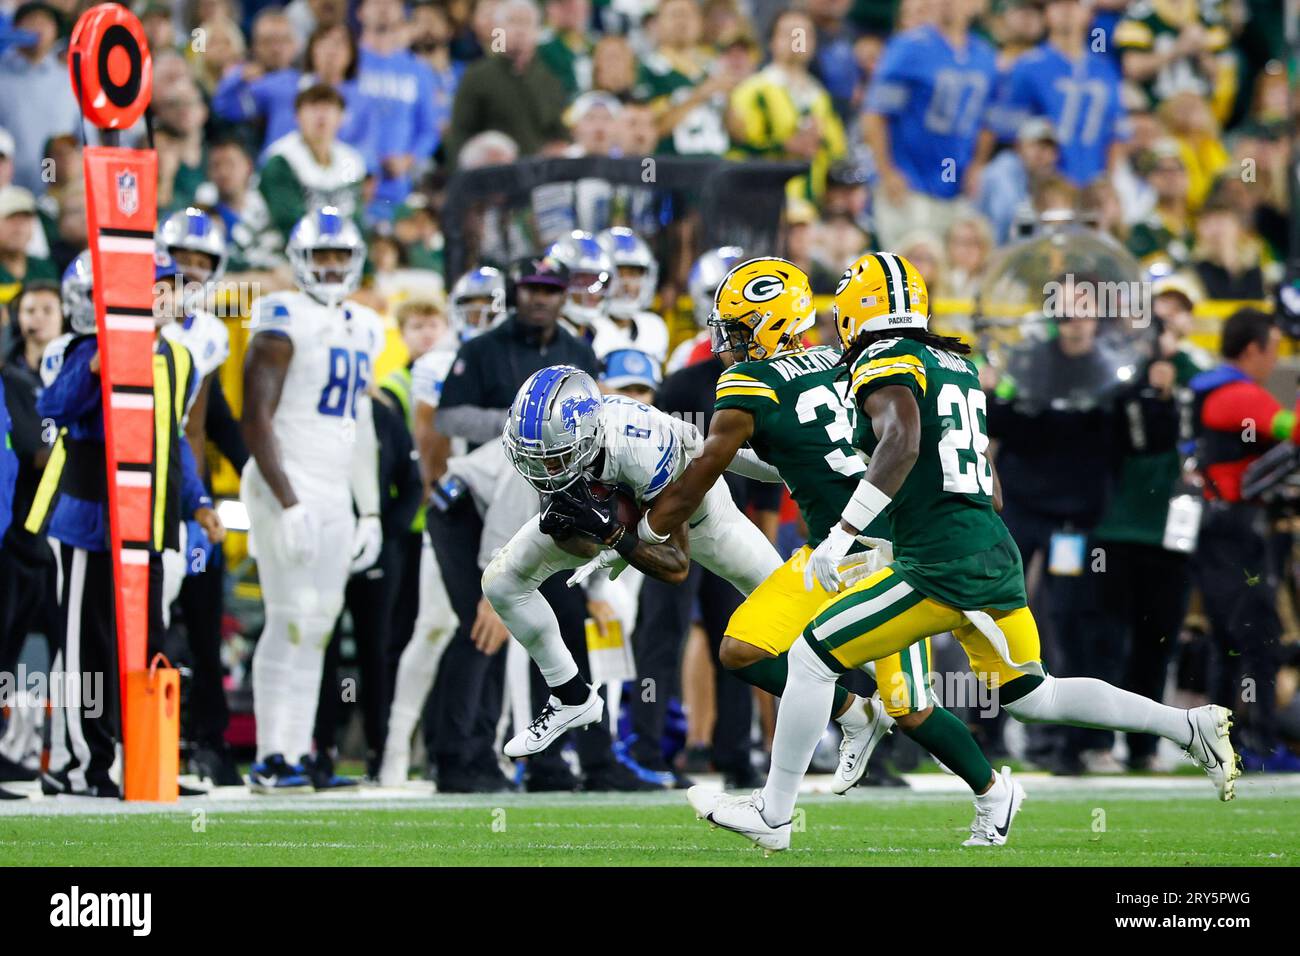 September 28, 2023 Detroit Lions wide receiver Josh Reynolds (8) makes a catch for a first down during the NFL football game between the Detroit Lions and the Green Bay Packers at